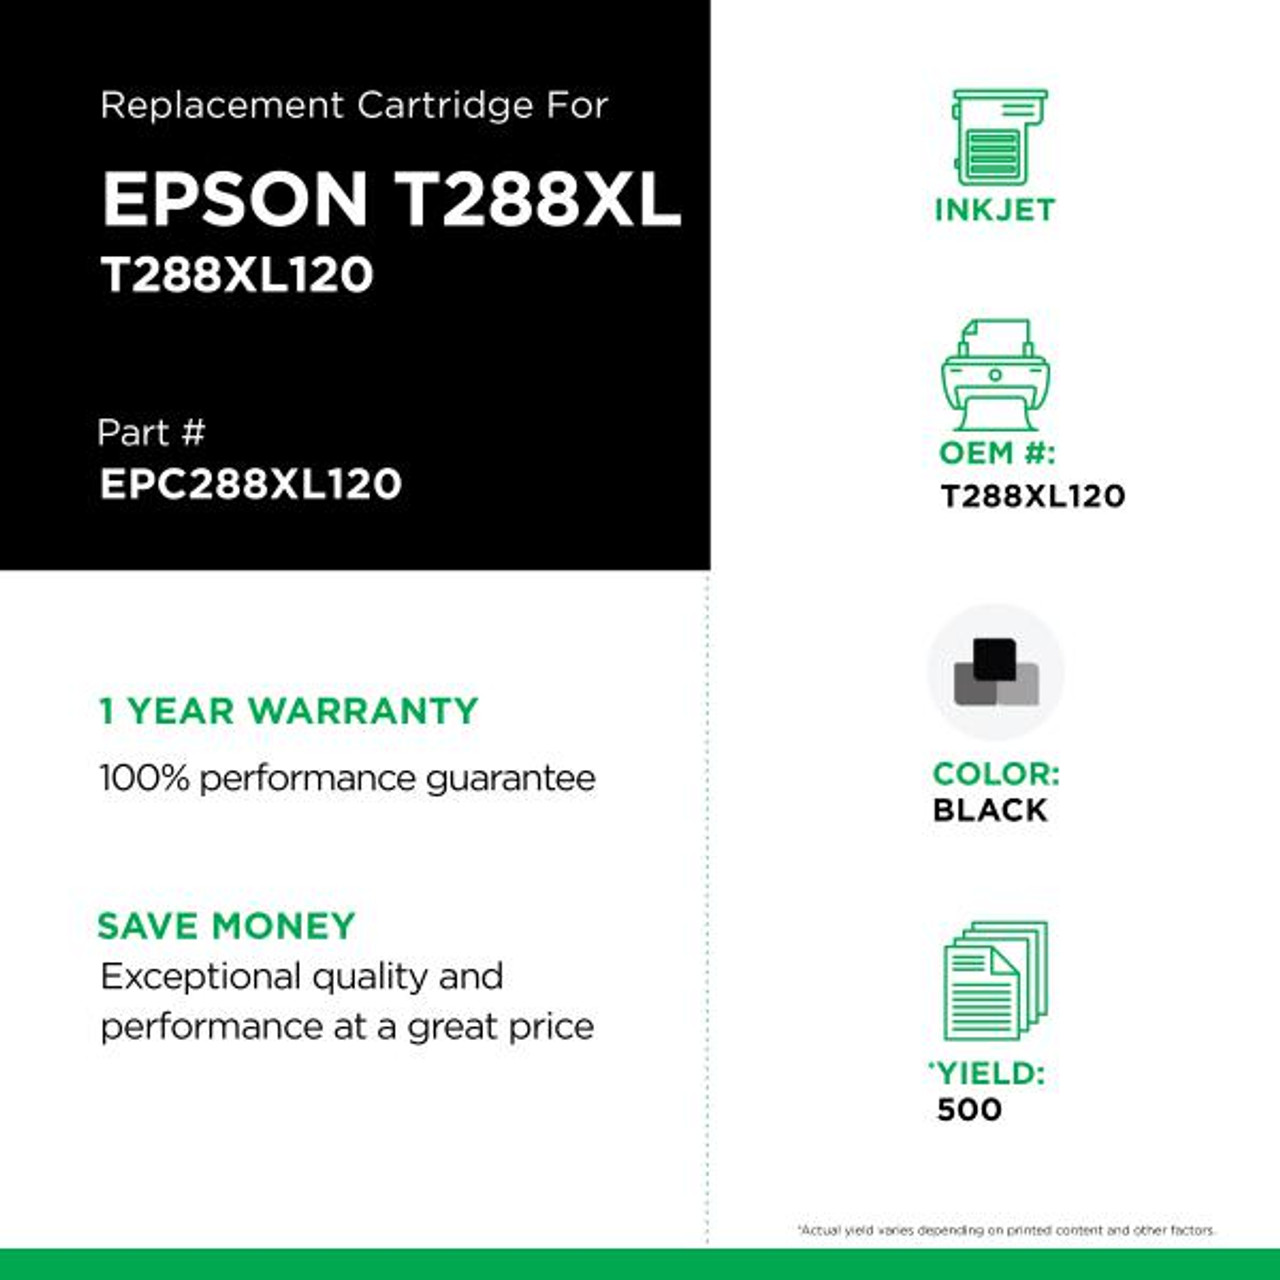 High Capacity Black Ink Cartridge for Epson T288XL120-2